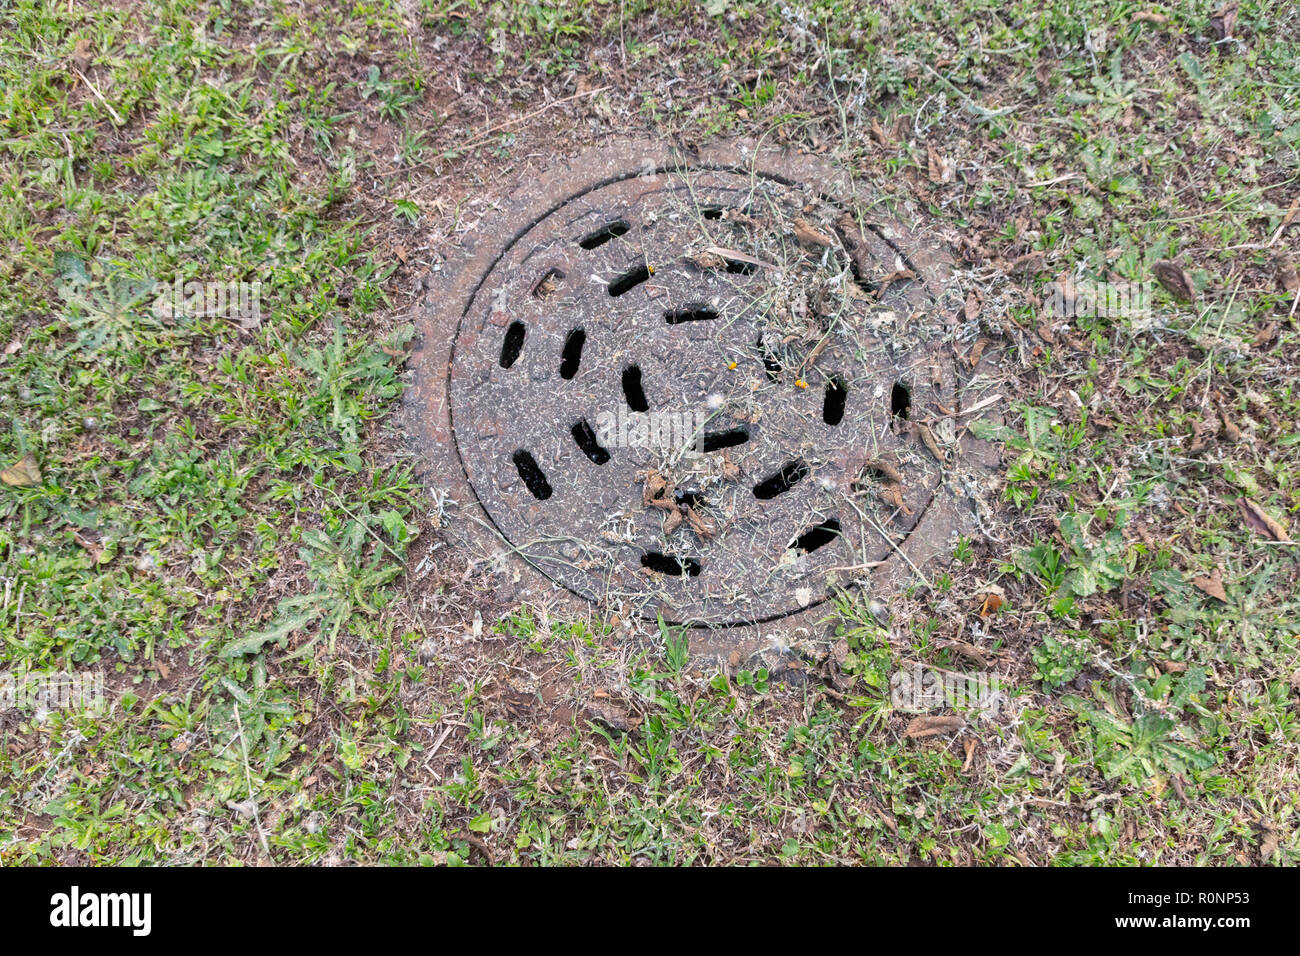 A close up view of a man hole cover, covered in dried cut grass outside in an open garden Stock Photo